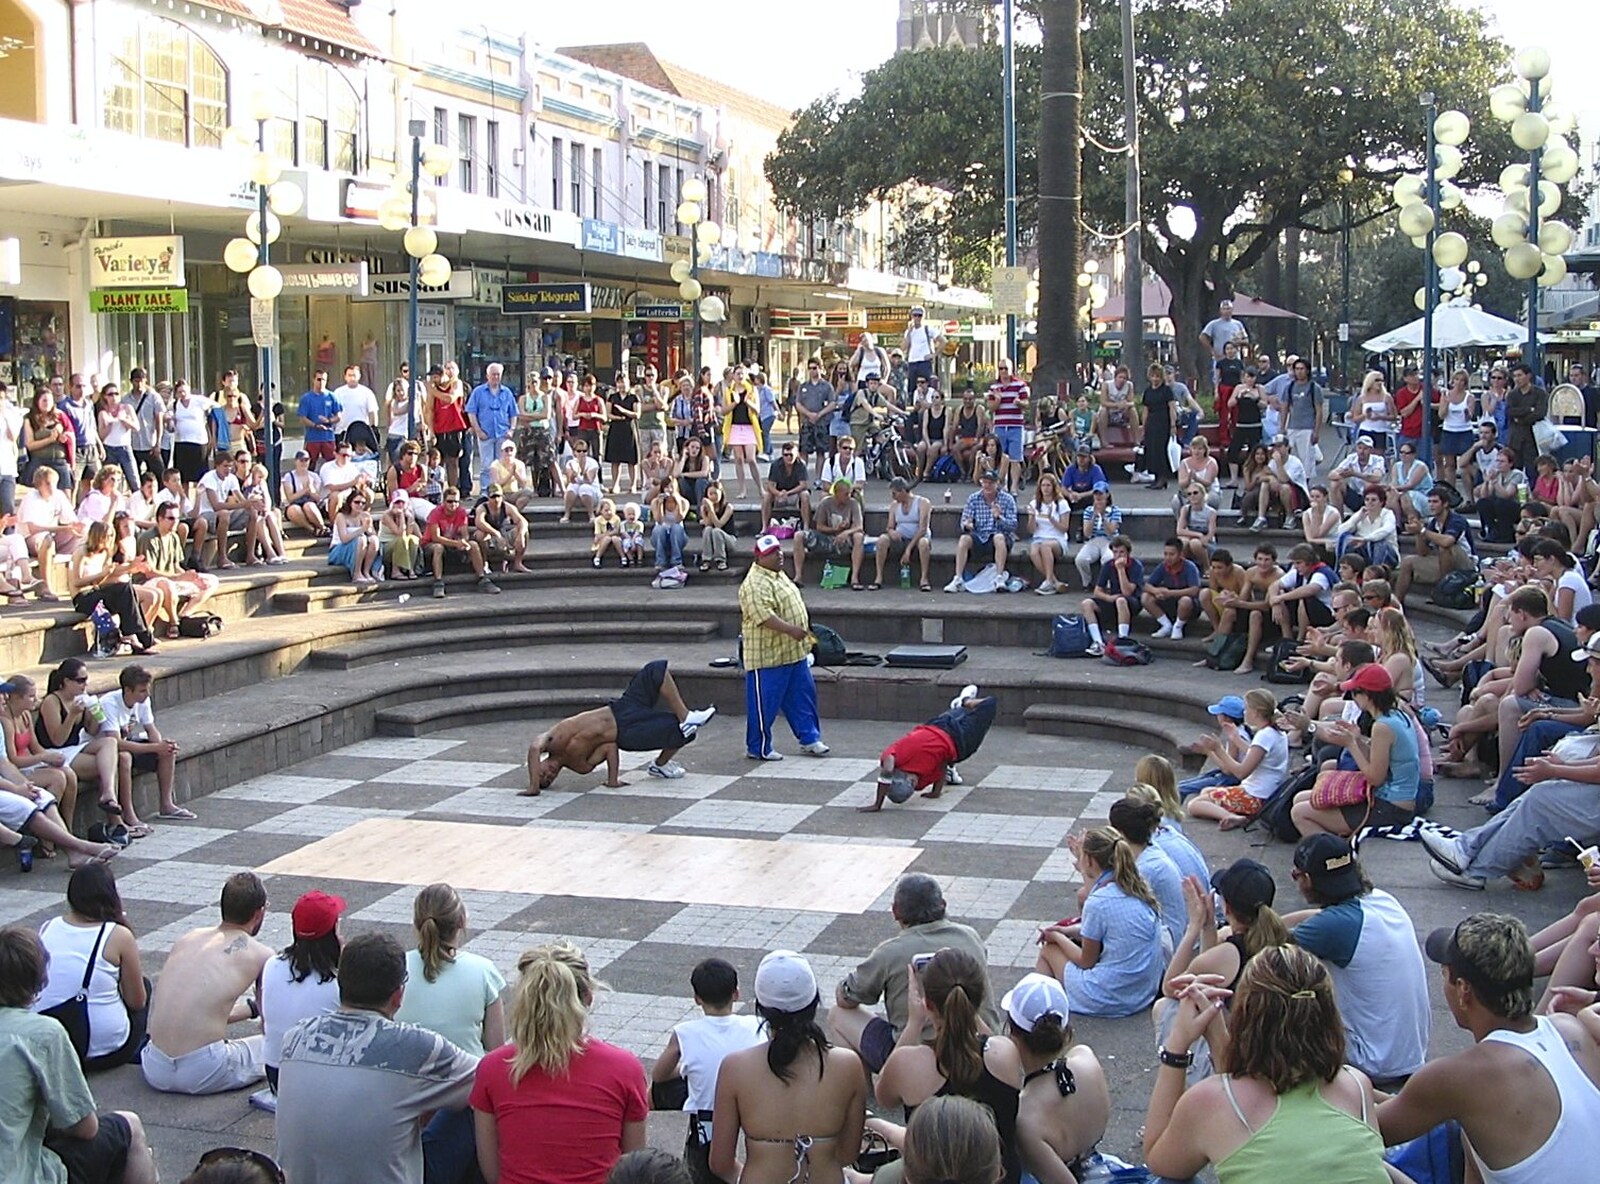 More breakdancing from Sydney, New South Wales, Australia - 10th October 2004